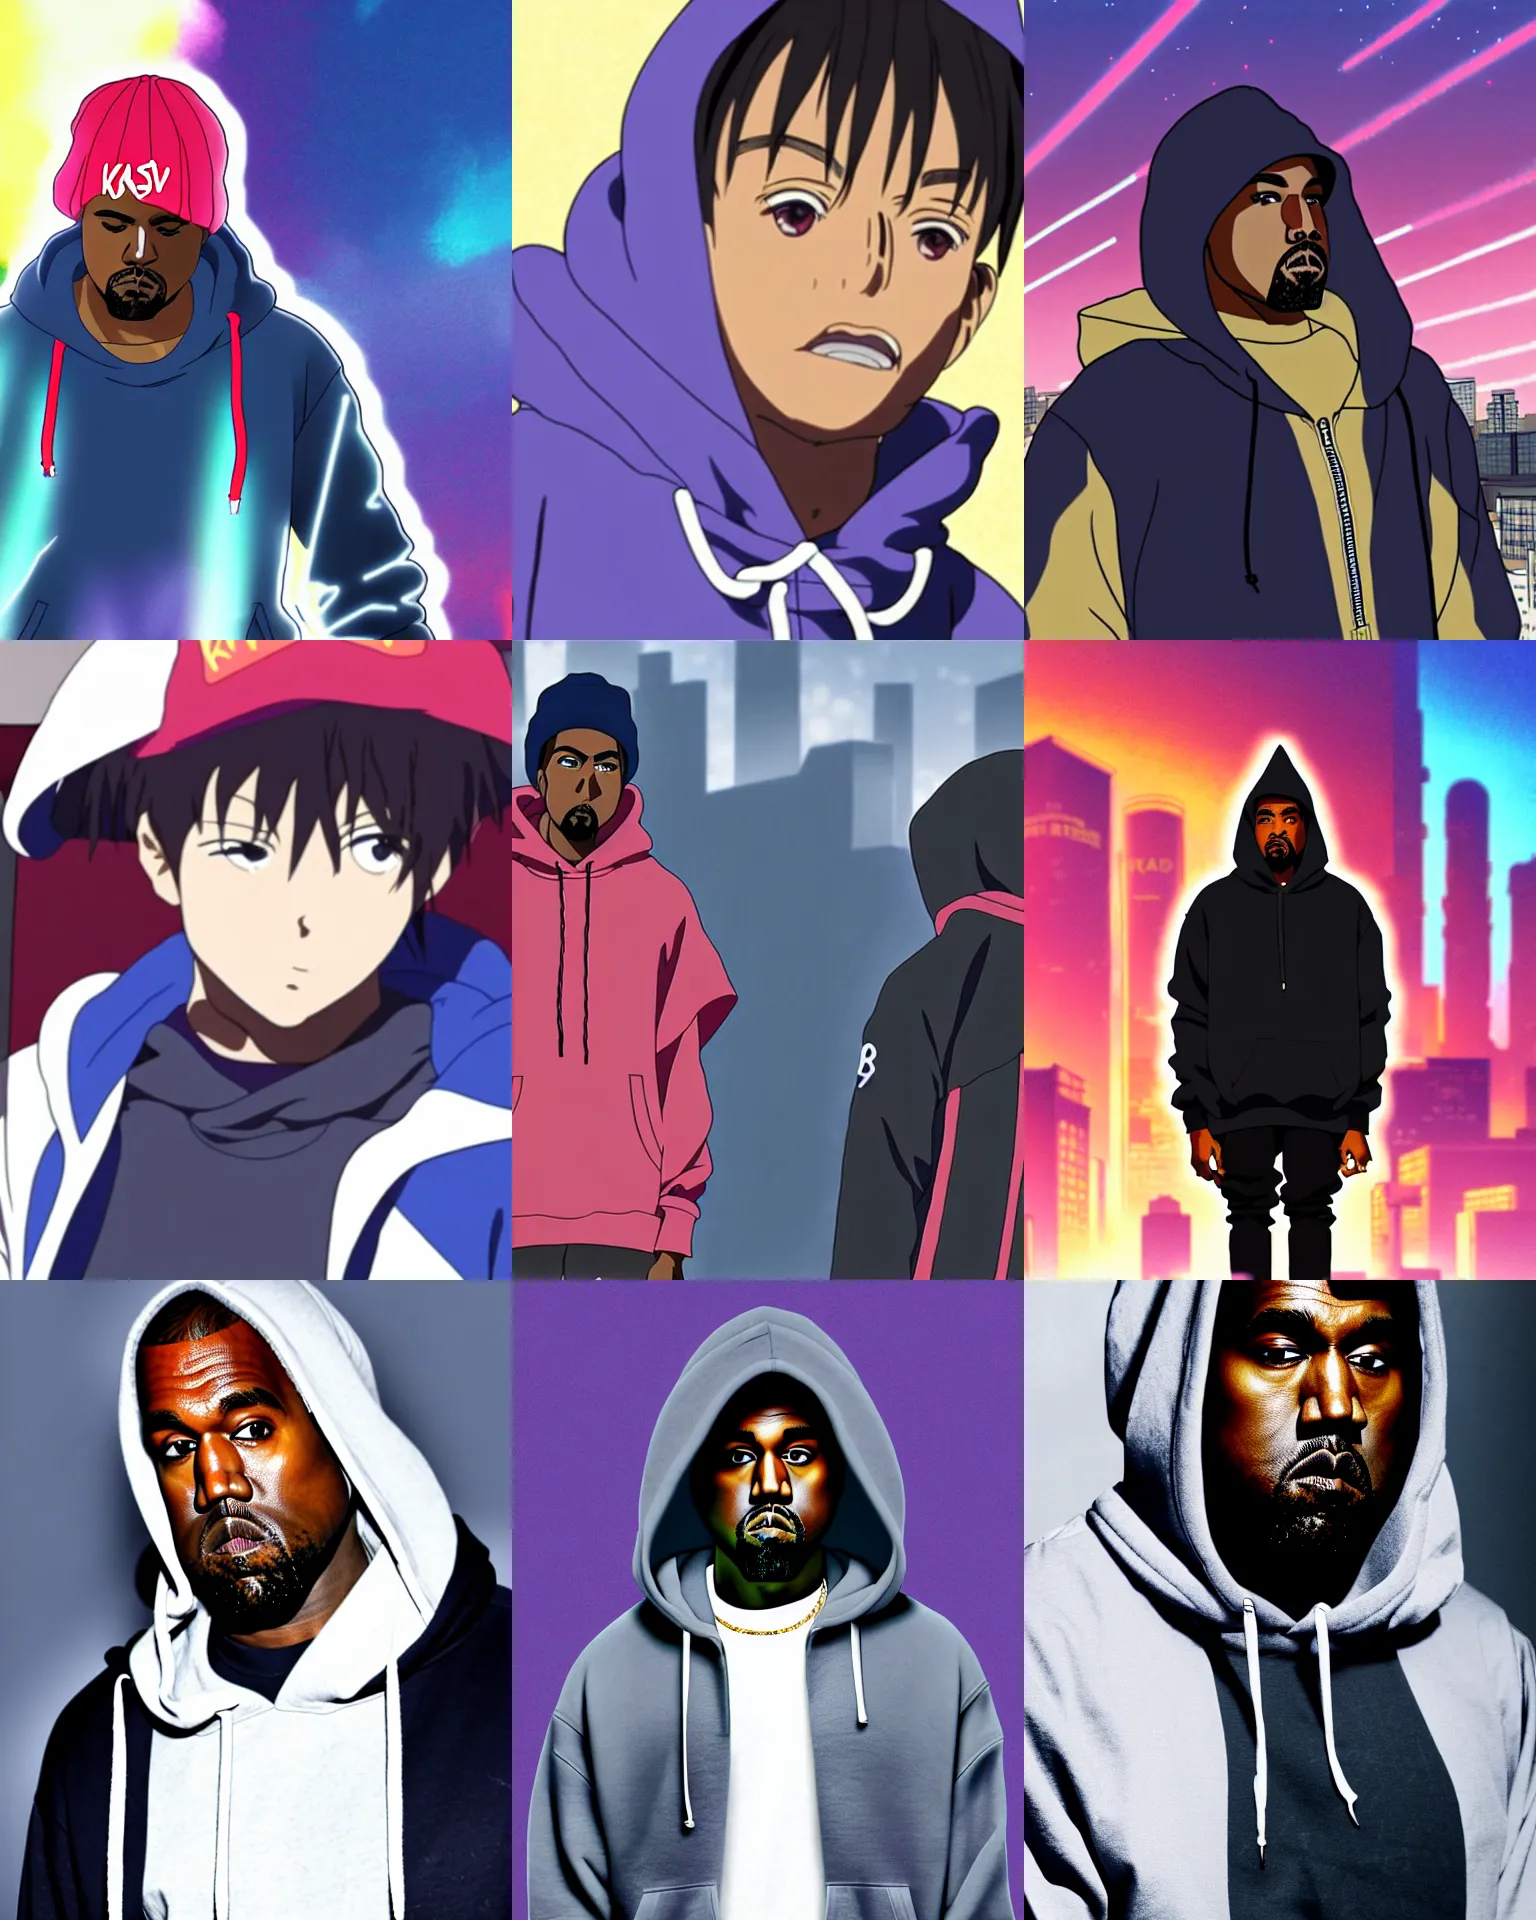 Kanye West released “The College Dropout” fourteen years ago today. Respect  to anyone who didn't finish c… | Anime character design, Anime characters,  Character art